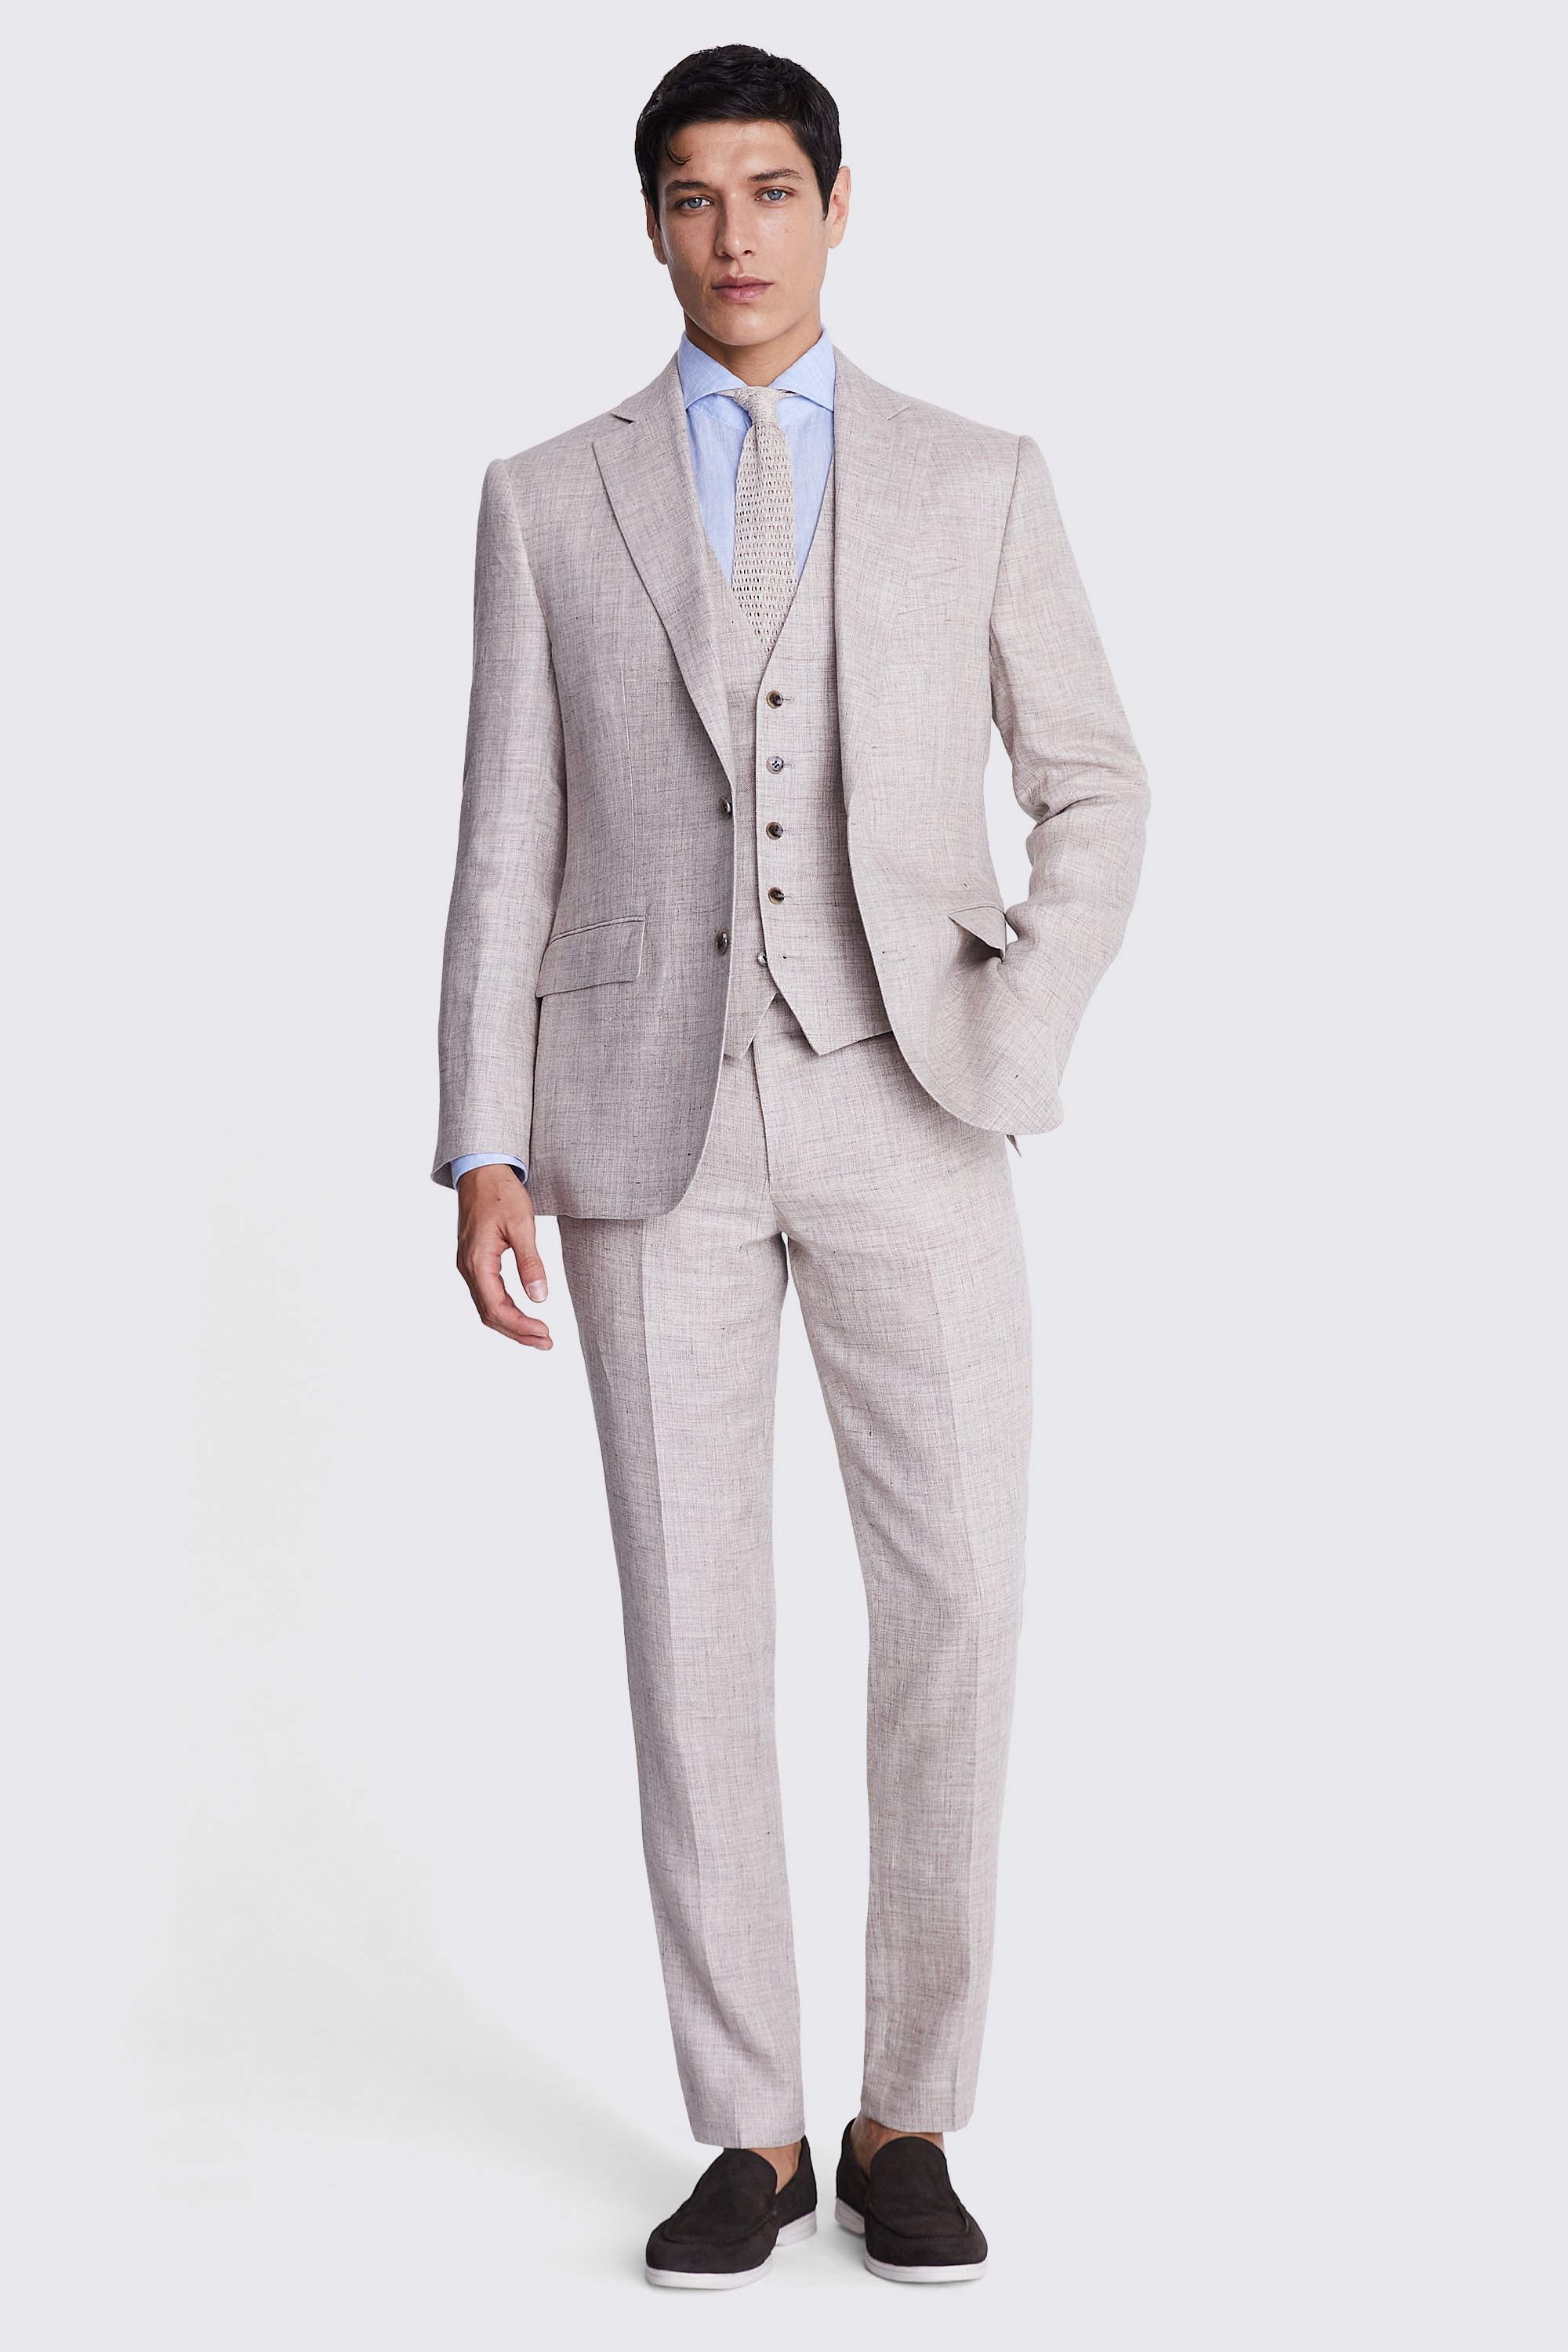 Tailored Fit Oatmeal Linen Jacket | Buy Online at Moss